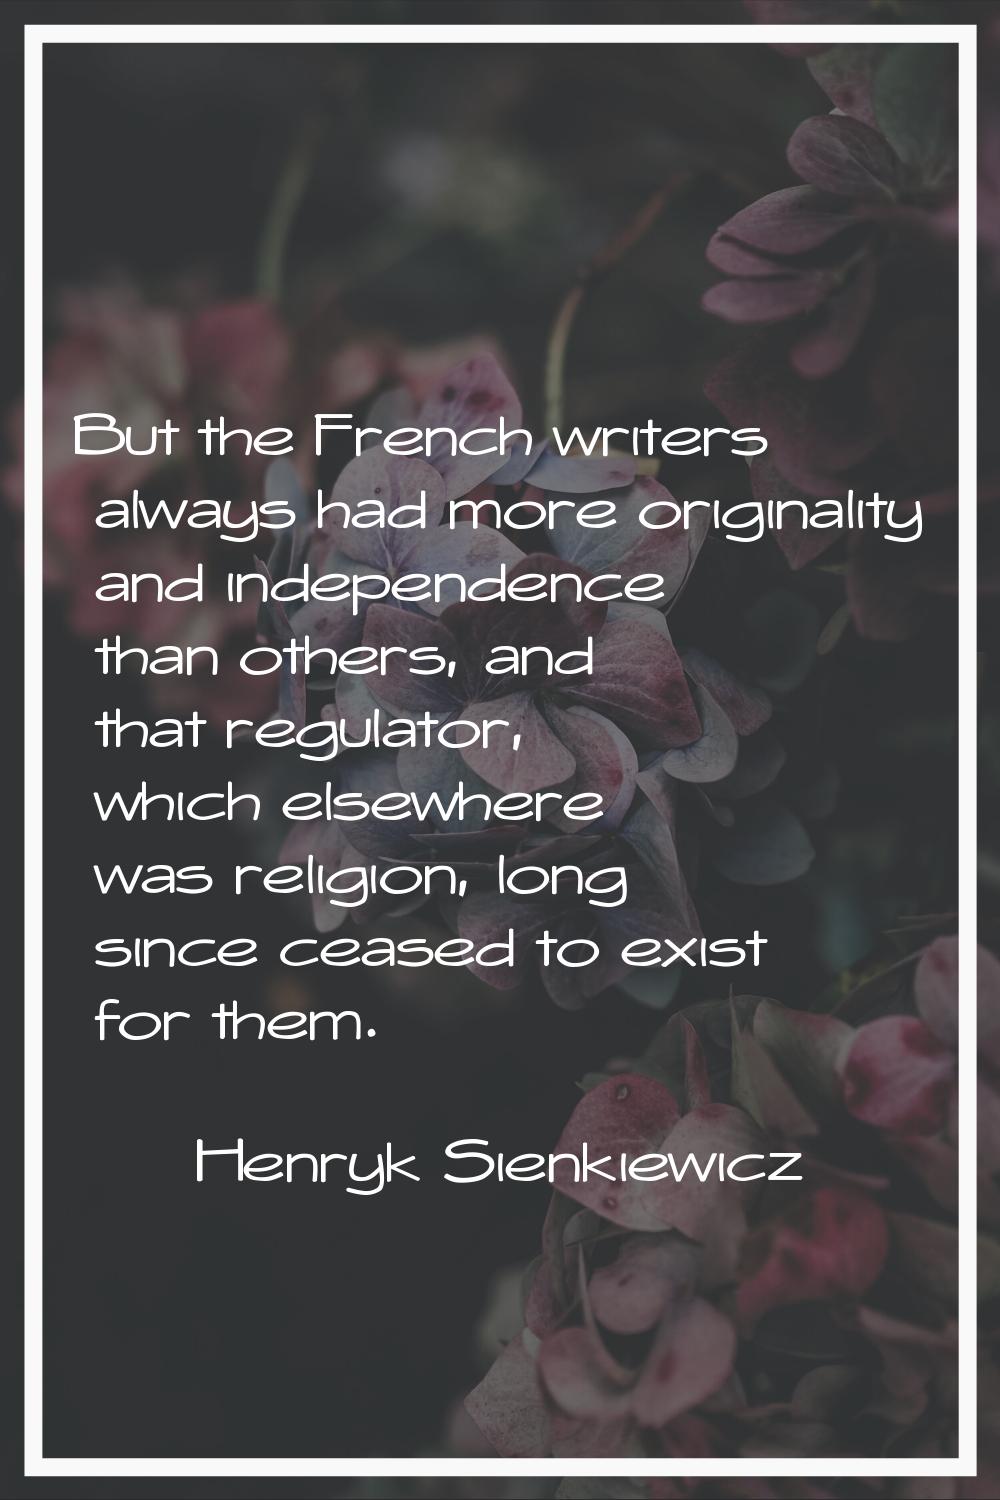 But the French writers always had more originality and independence than others, and that regulator